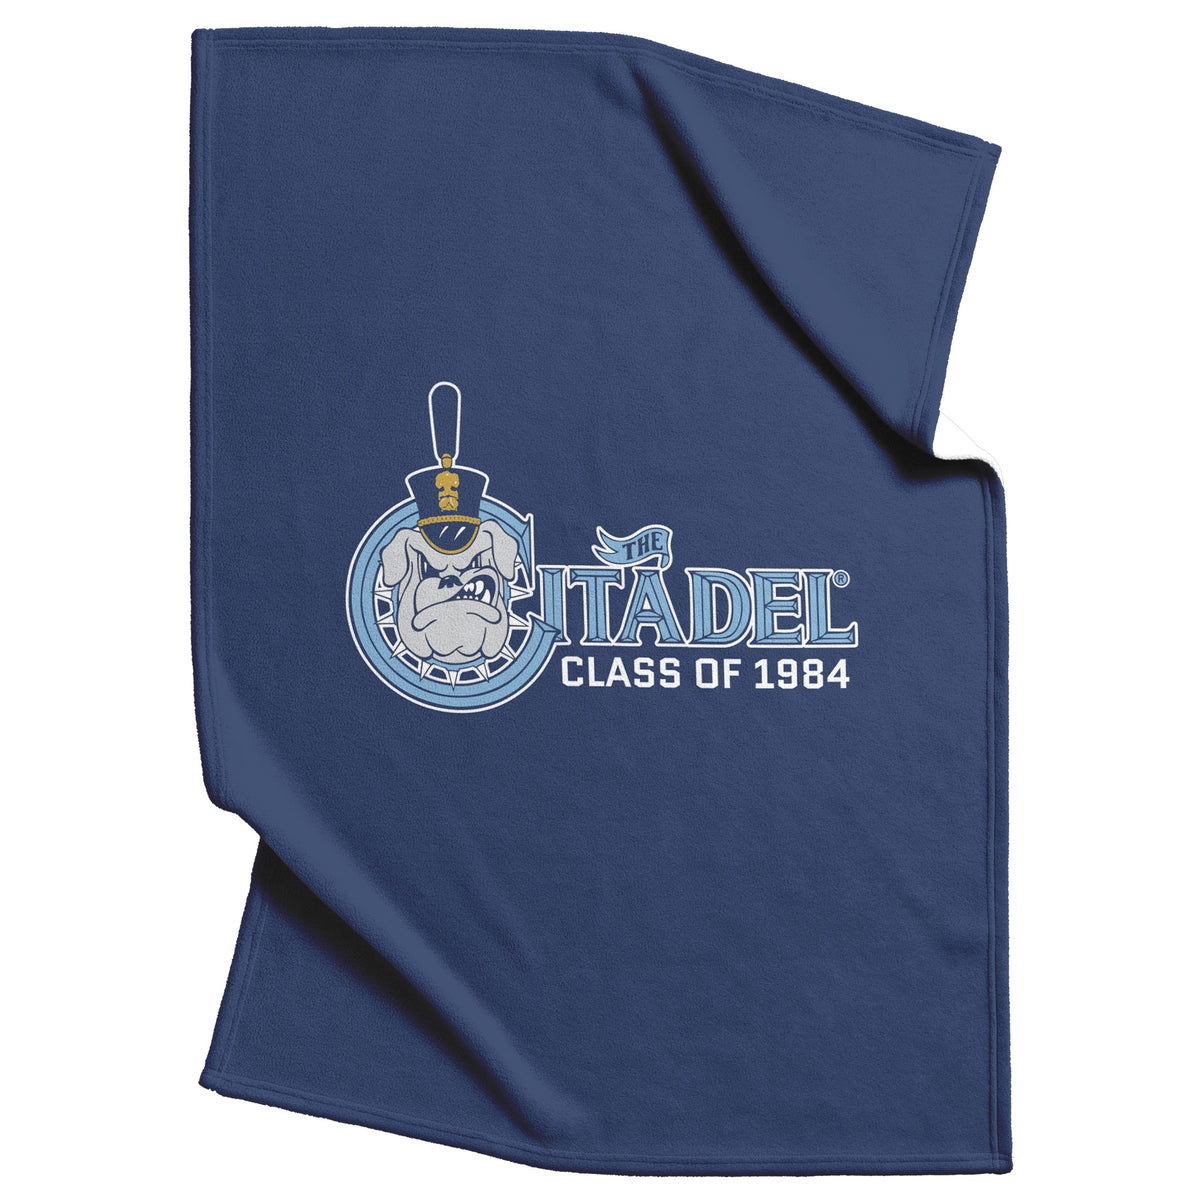 The Citadel Spike, Class of 1984 Blanket